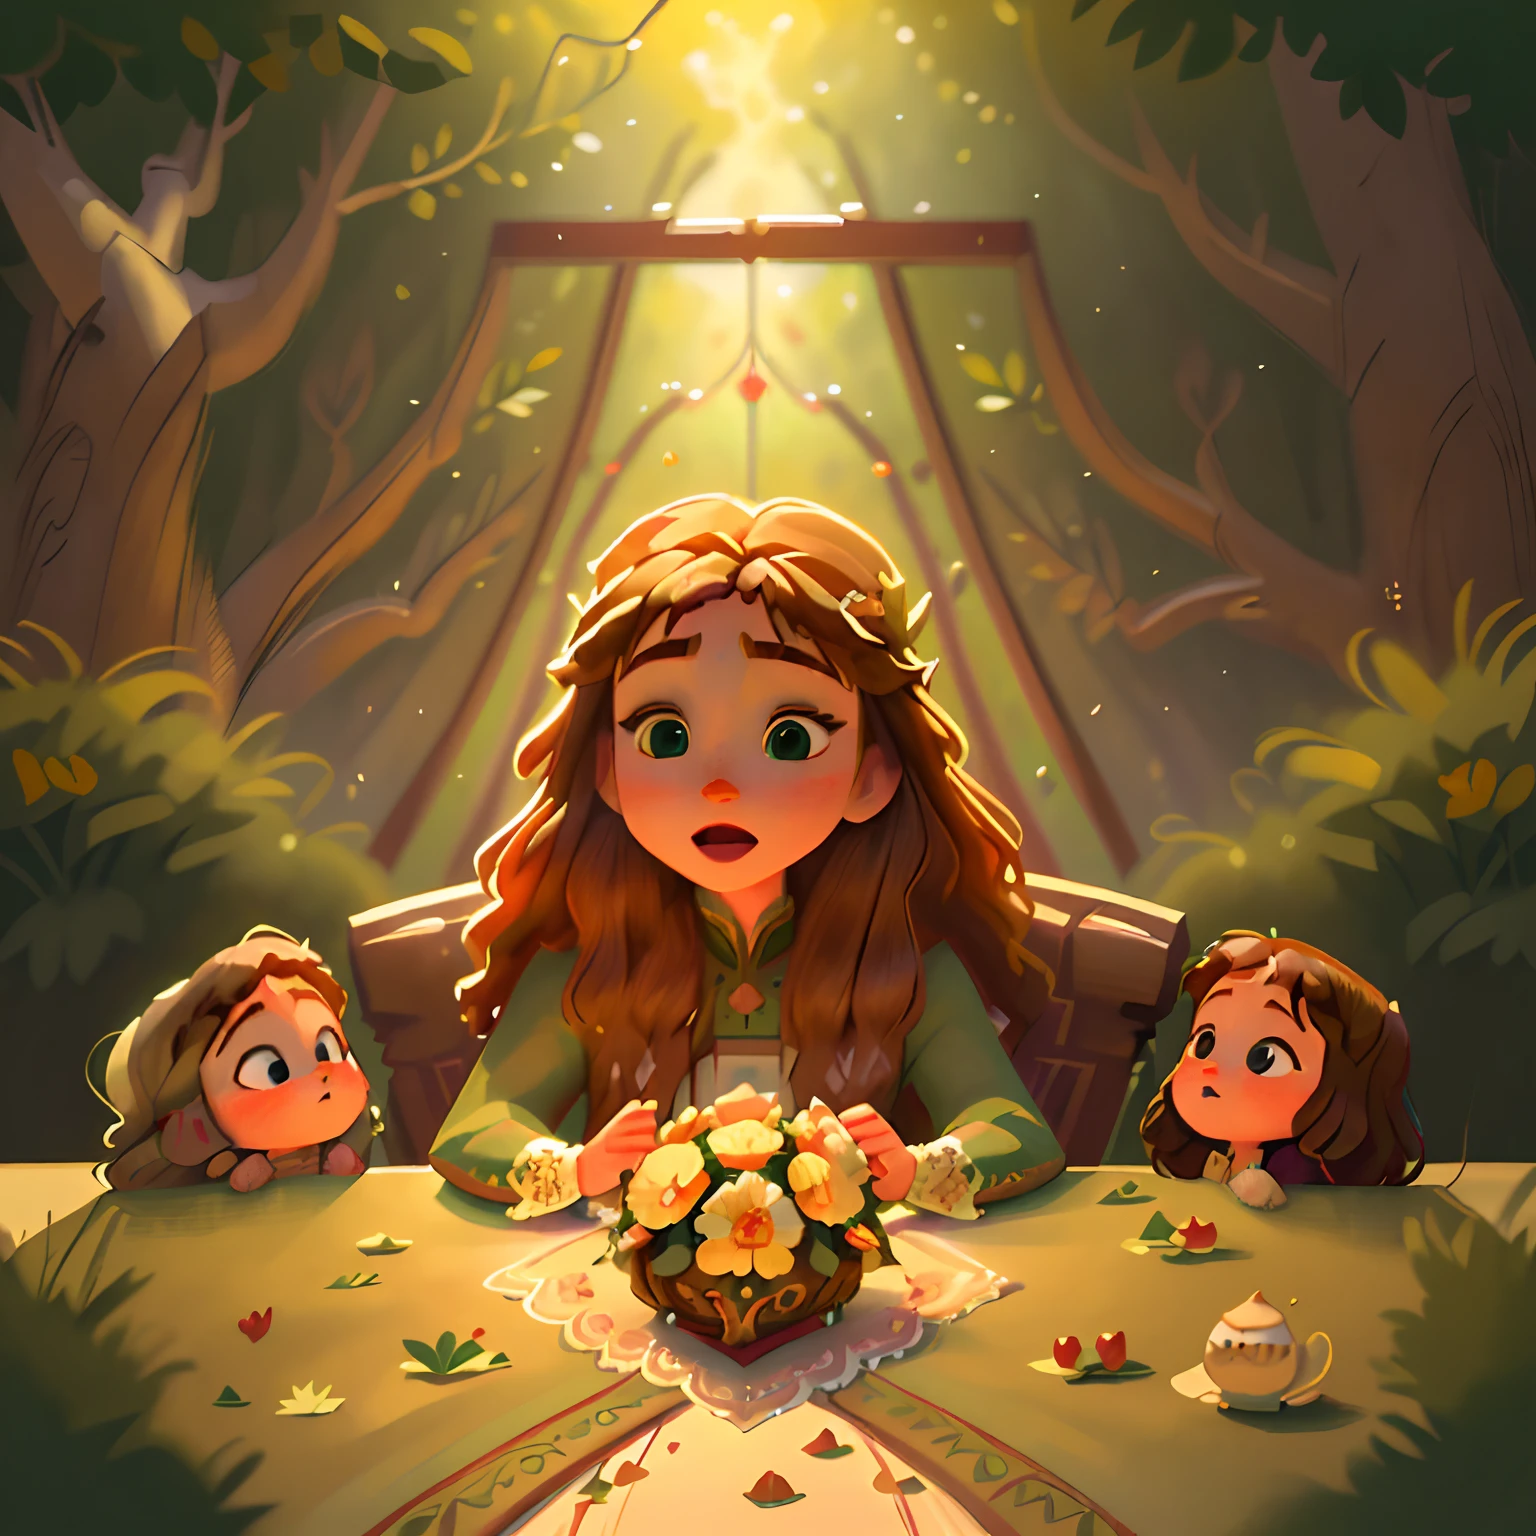 (highres:1.2),Happy Medieval Mom and 2daughters,beautiful detailed eyes,lush green garden,long flowing hair,traditional medieval dresses,castle in the background,soft natural lighting,portrait,realistic colors,peaceful ambiance,immaculate details,classic oil painting,old master style,a moment frozen in time,subtle brush strokes,vibrant hues,serene expressions,loving bond between mother and daughters,graceful poses,sunlight streaming through the trees,meticulous attention to detail,expression of tenderness and care,impressive depth and dimension,majestic architecture,storybook-like atmosphere,mother's nurturing presence,sparkling jewels and headpieces,triumphant yet tender,ancient tapestries and decor,floral patterns and embroidery,draped fabrics and textures,delicate lace and ruffles,sumptuous banquet table in the castle,playful interaction between the daughters,jewel-toned stained glass windows,lush blooming flowers,butterflies and birds fluttering around,unraveling stories and mysteries,an enchanting tale of love and family.